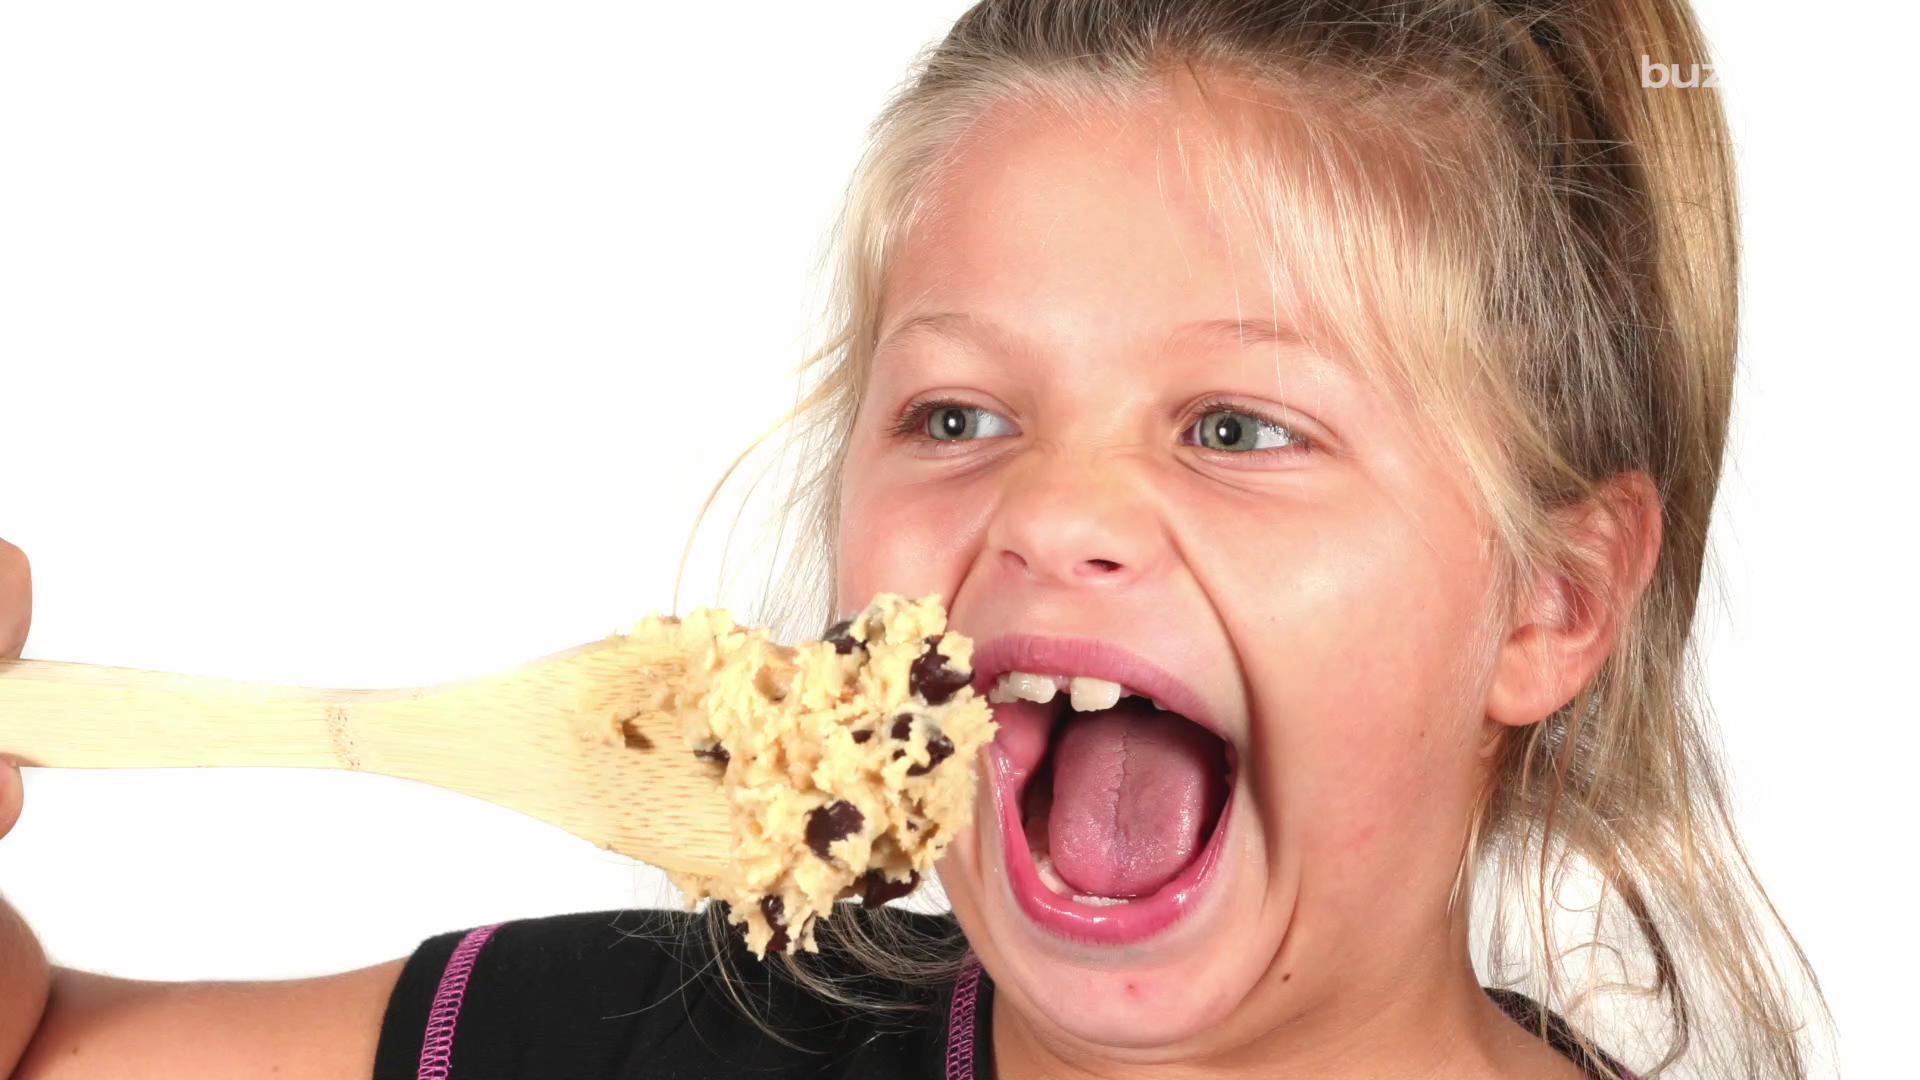 Can I Eat Raw Cookie Dough No The Cdc Warns